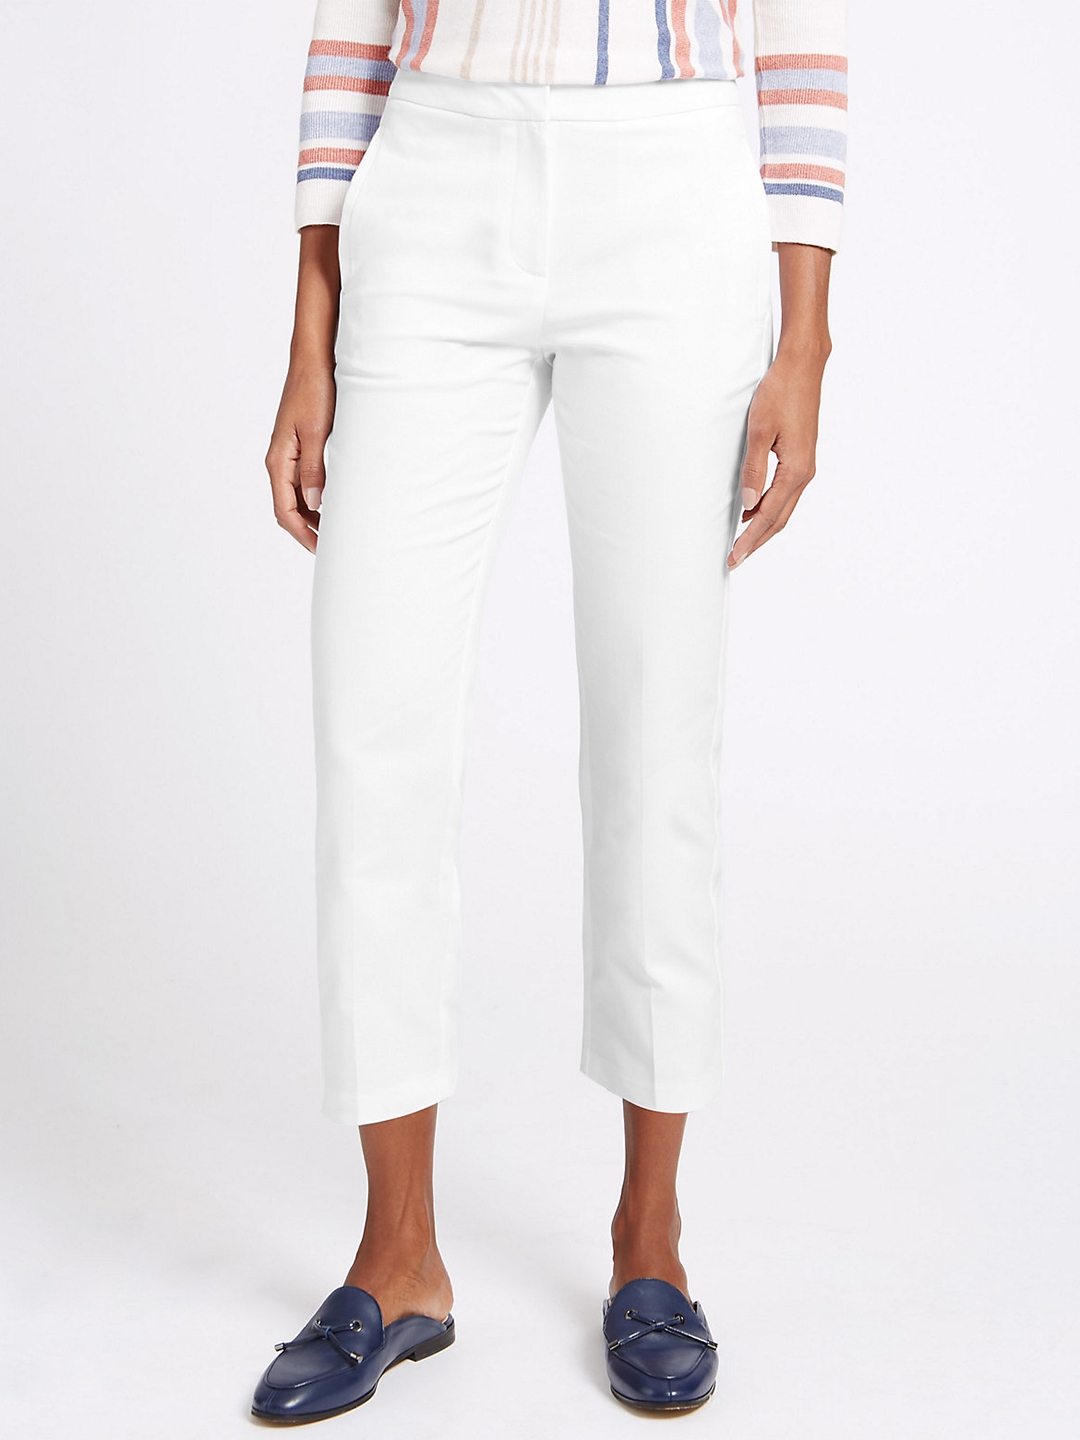 Buy Off White Cropped Pant Cotton for Best Price Reviews Free Shipping